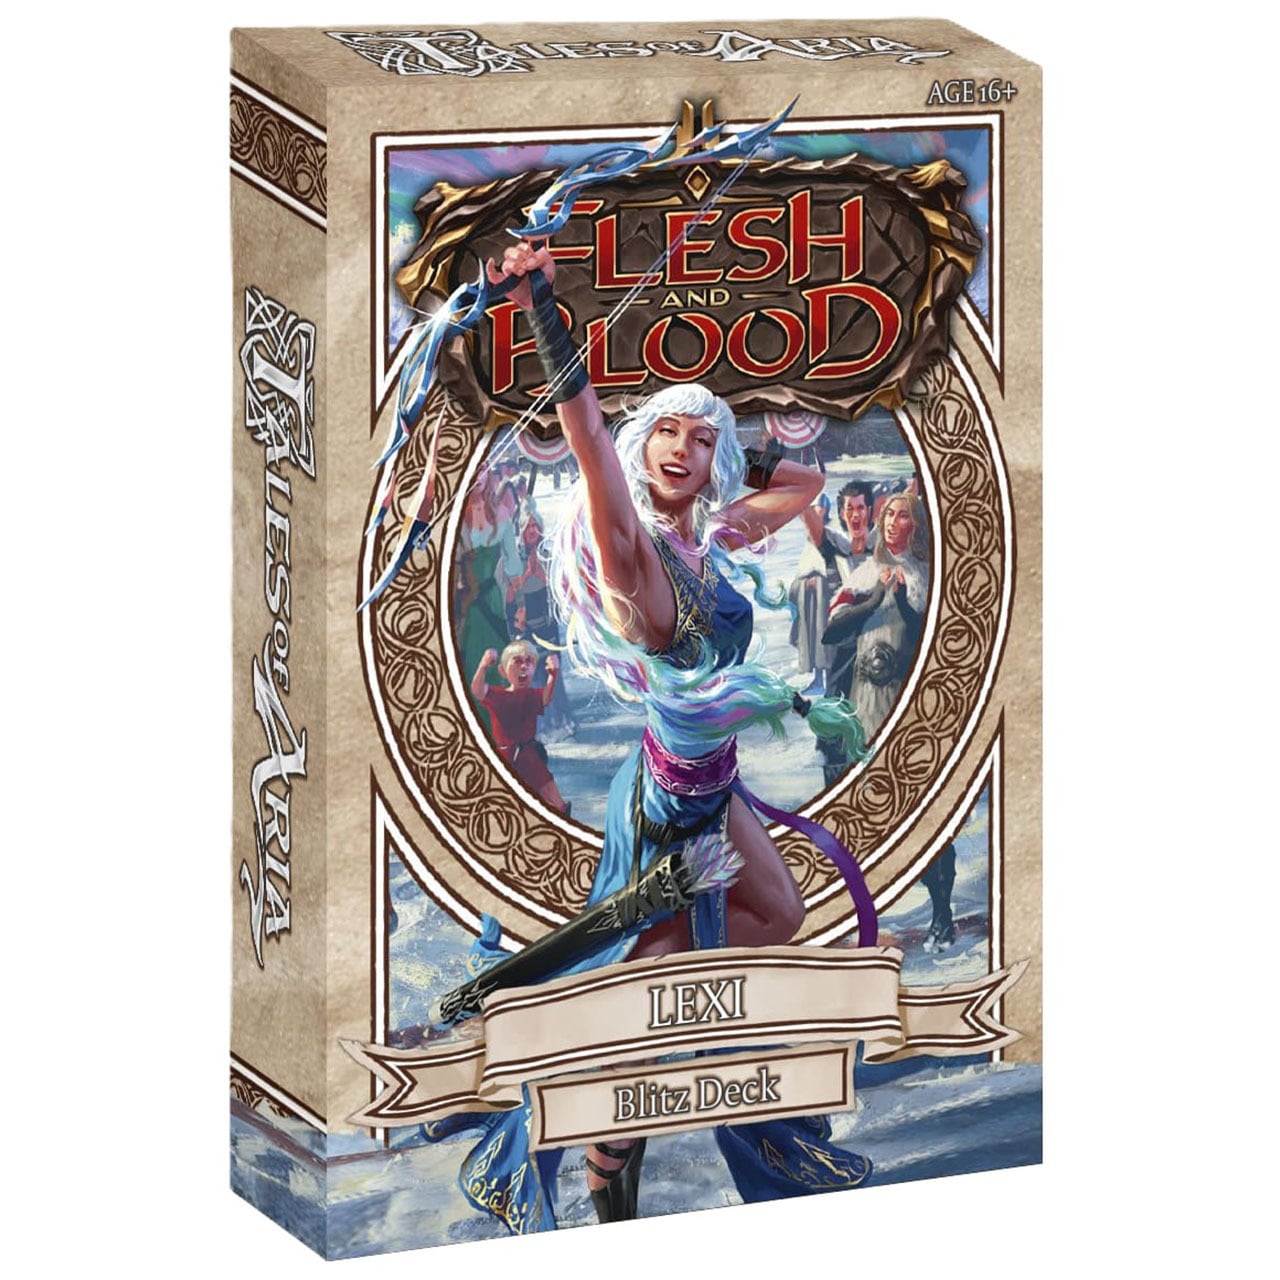 【Flesh and Blood】Tales of Aria Blitz Deck - Lexi